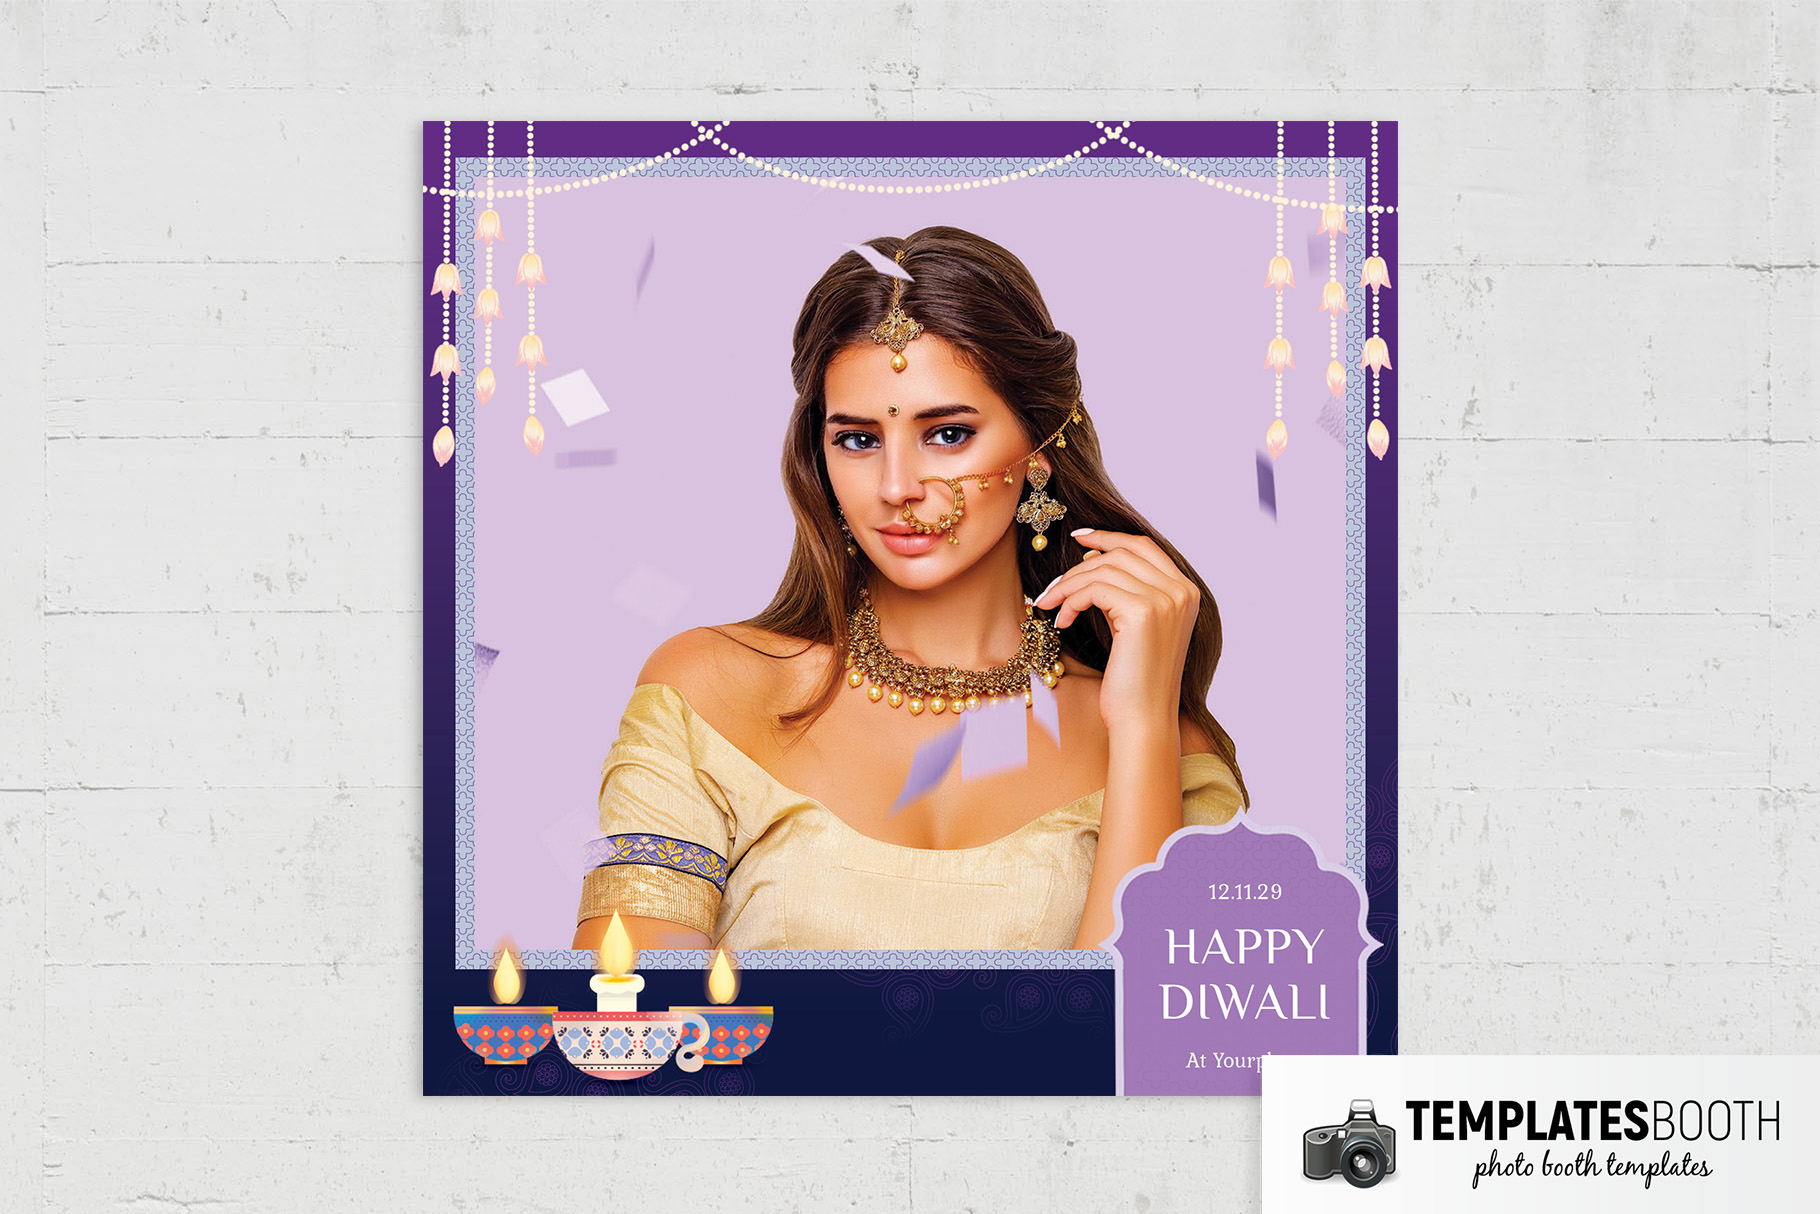 Diwali Festival Photo Booth Template